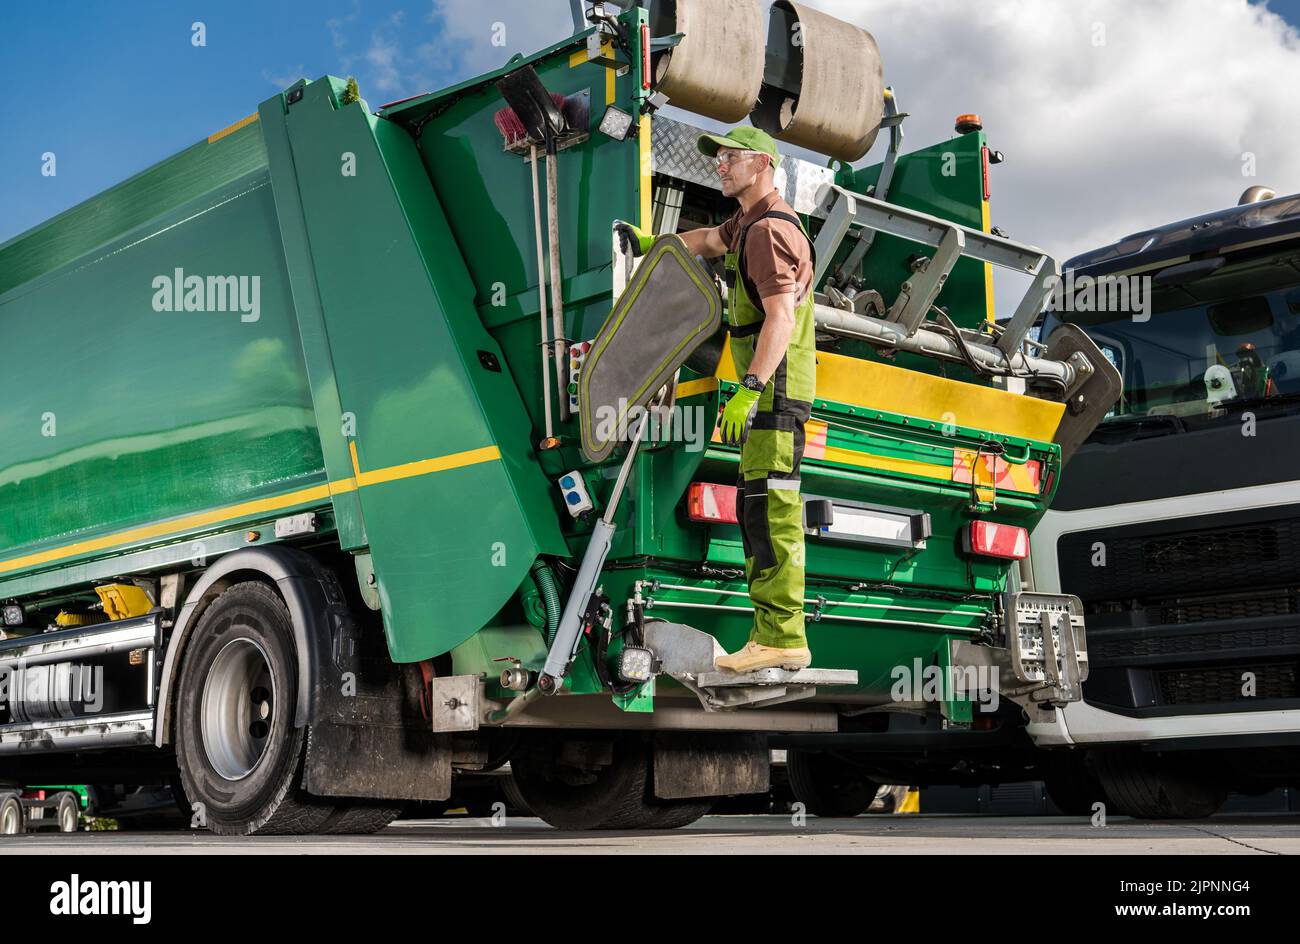 Caucasian Modern Garbage Truck Worker Riding on a Rear Side of the Vehicle. Waste Management Industry Job. Sorting and Recycling Theme. Stock Photo